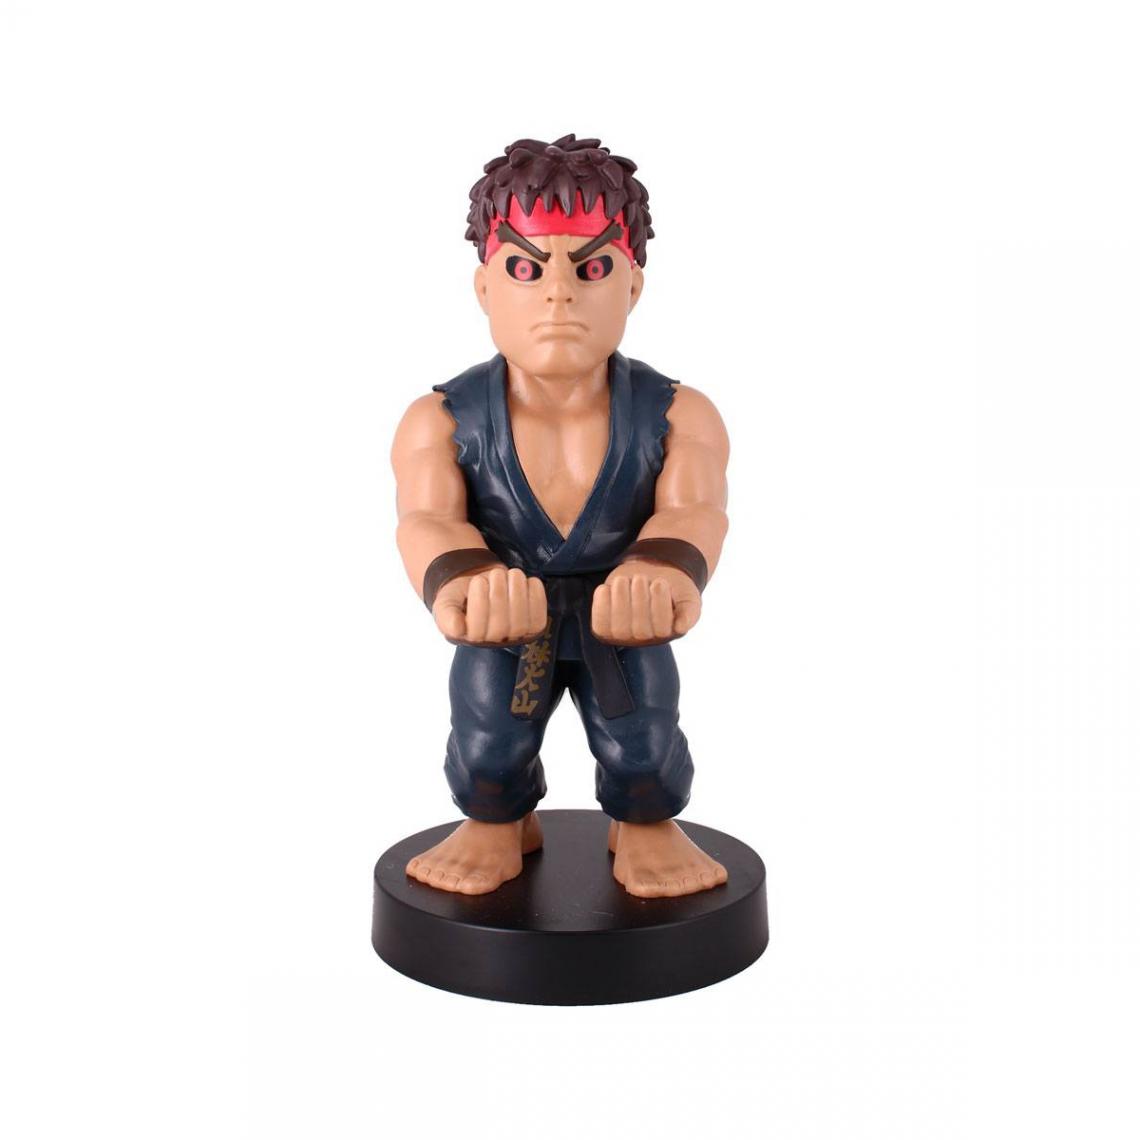 Exquisit - Street Fighter - Figurine Cable Guy Evil Ryu 20 cm - Mangas